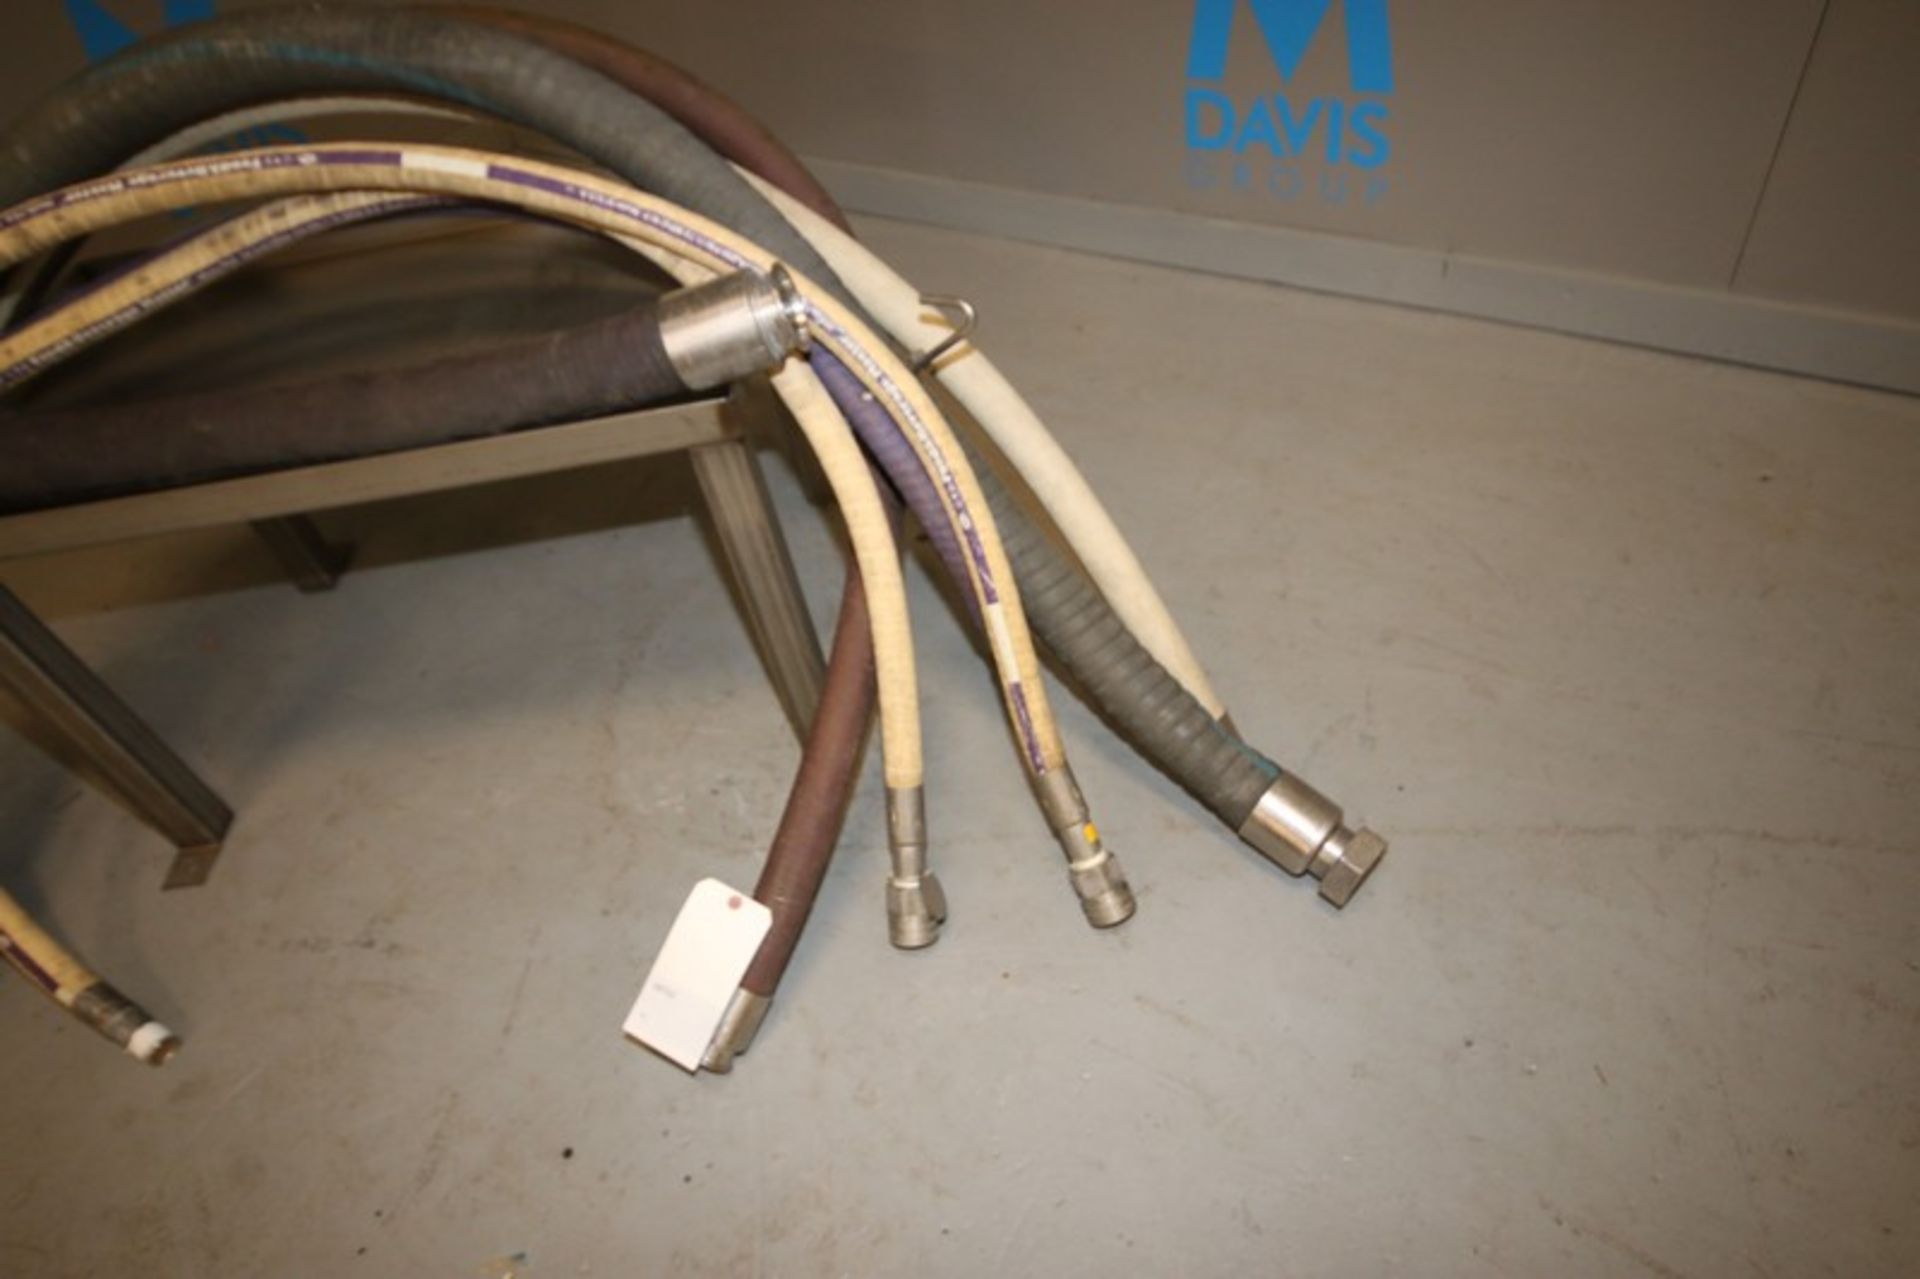 Assorted Transfer Hoses, Length Ranging FromAprox. 35" L - 125" L, Clamp Type, Insert Type, and - Image 6 of 7